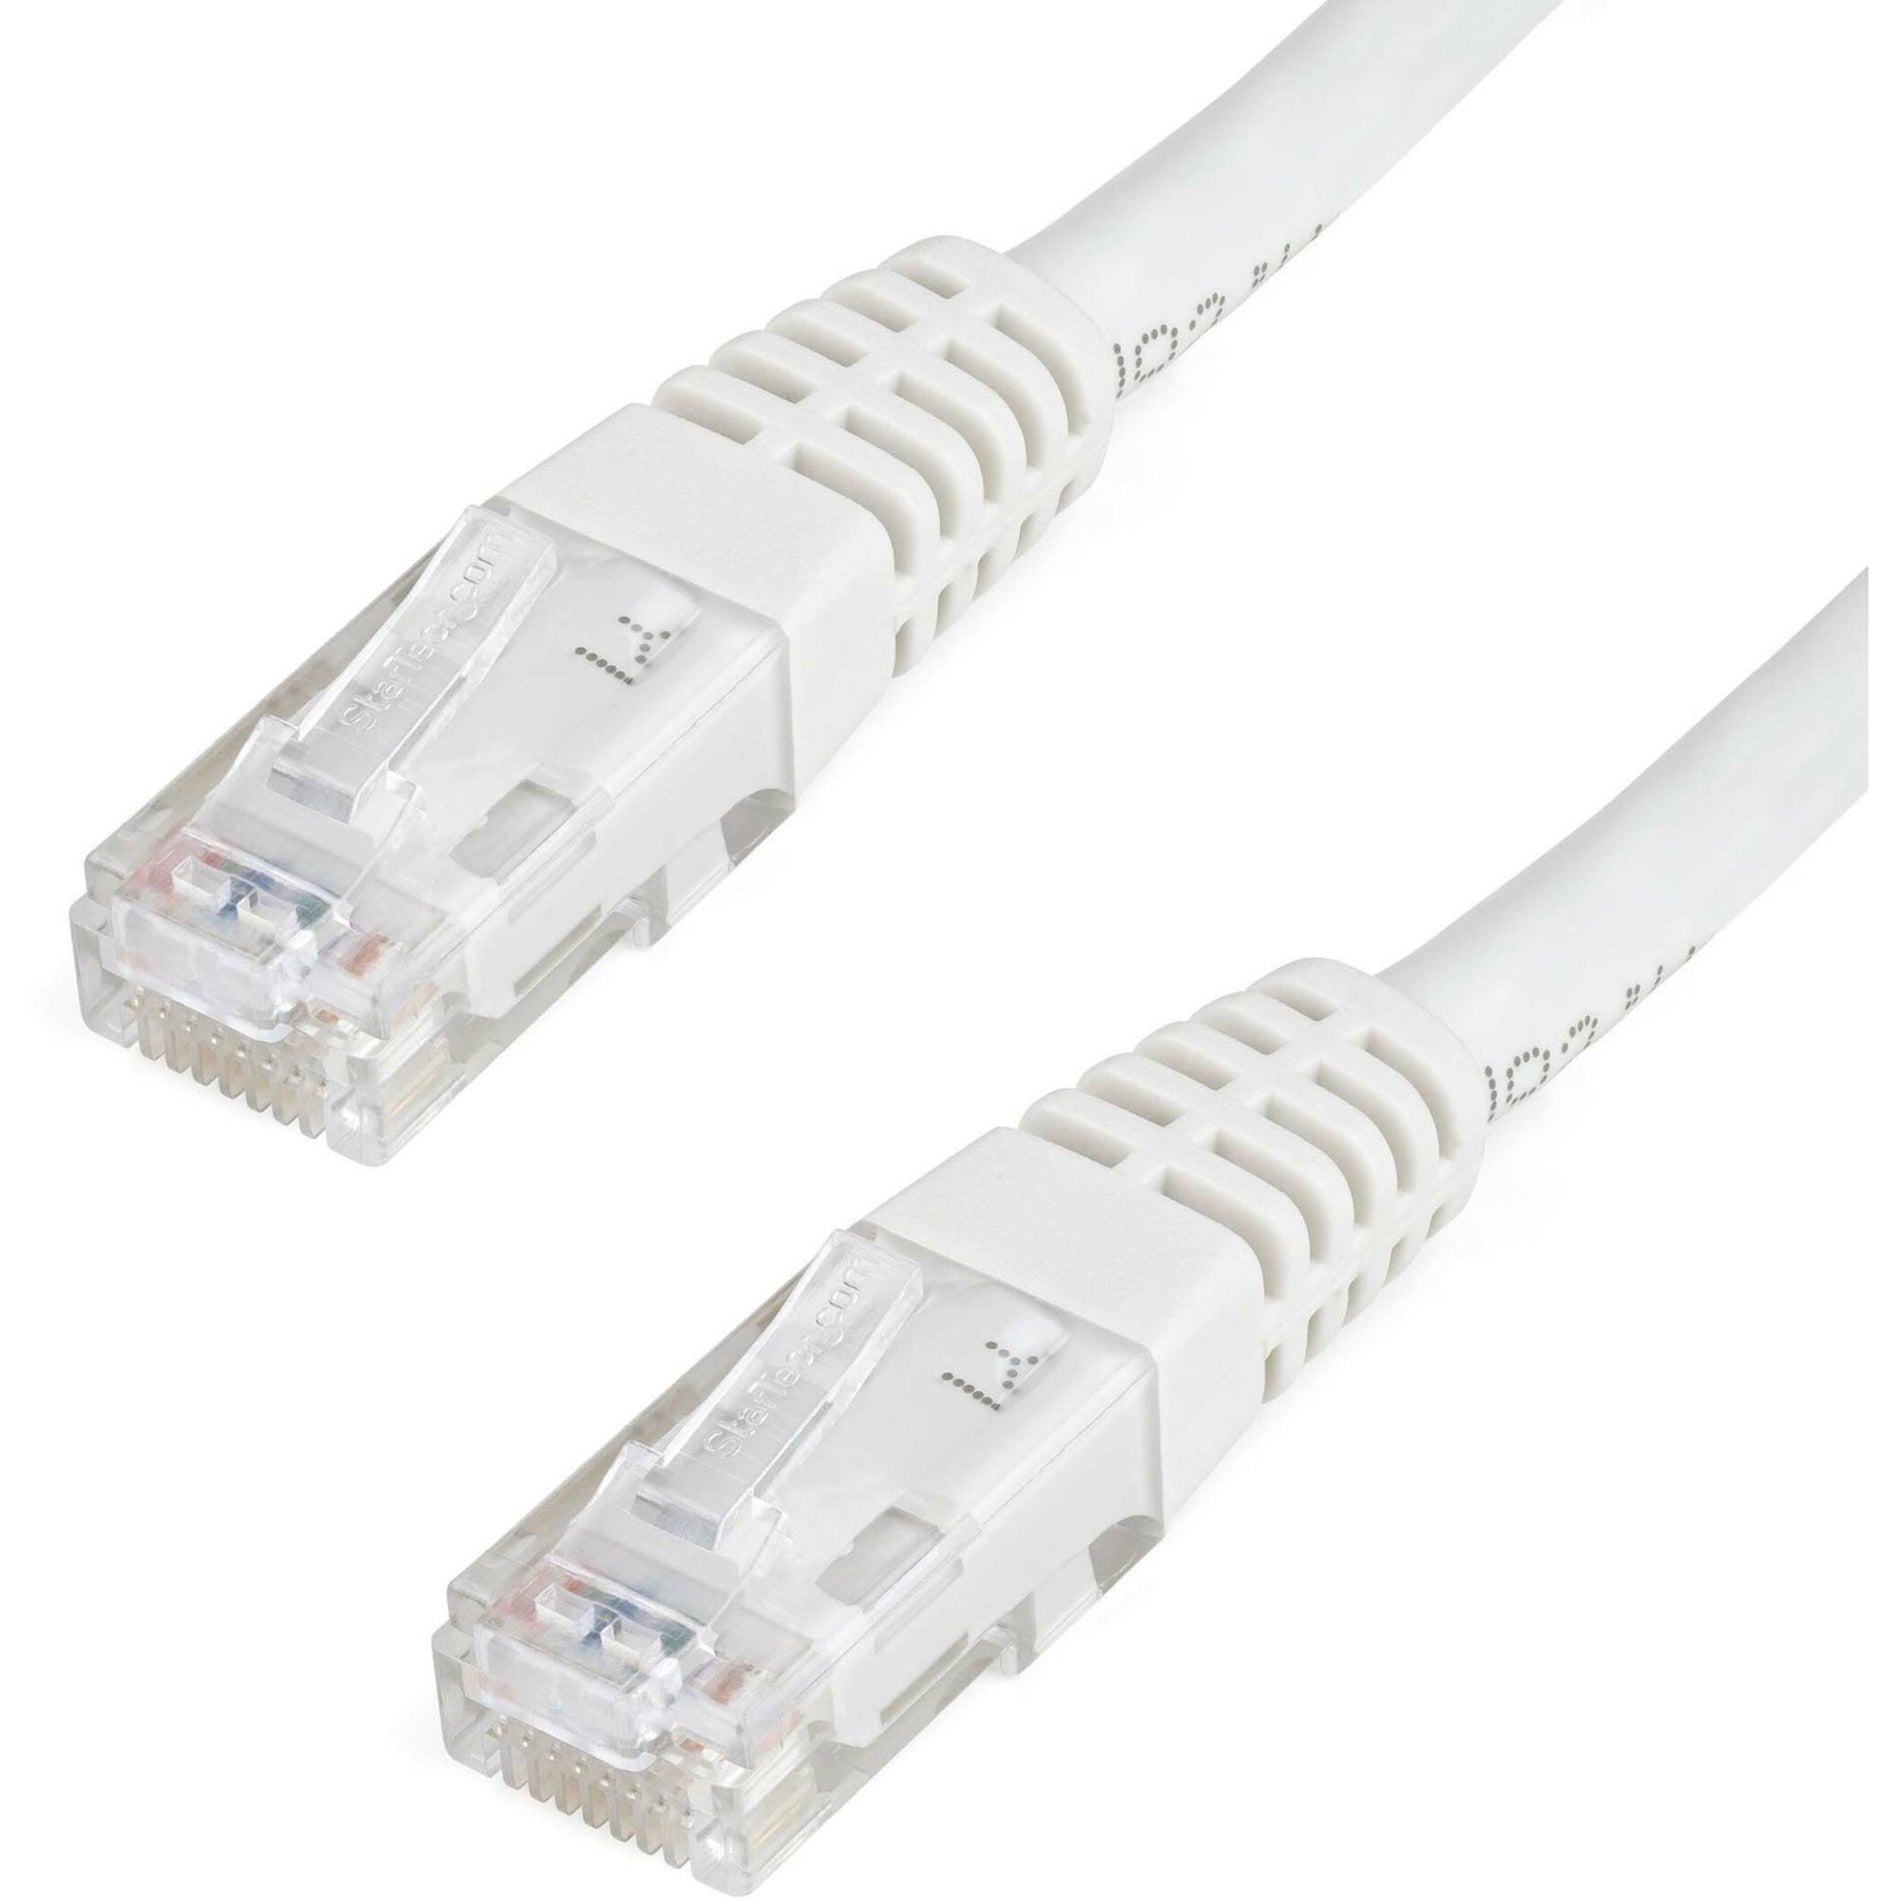 StarTech.com C6PATCH3WH 3ft White Cat6 UTP Patch Cable ETL Verified, 10 Gbit/s Data Transfer Rate, Gold Plated Connectors